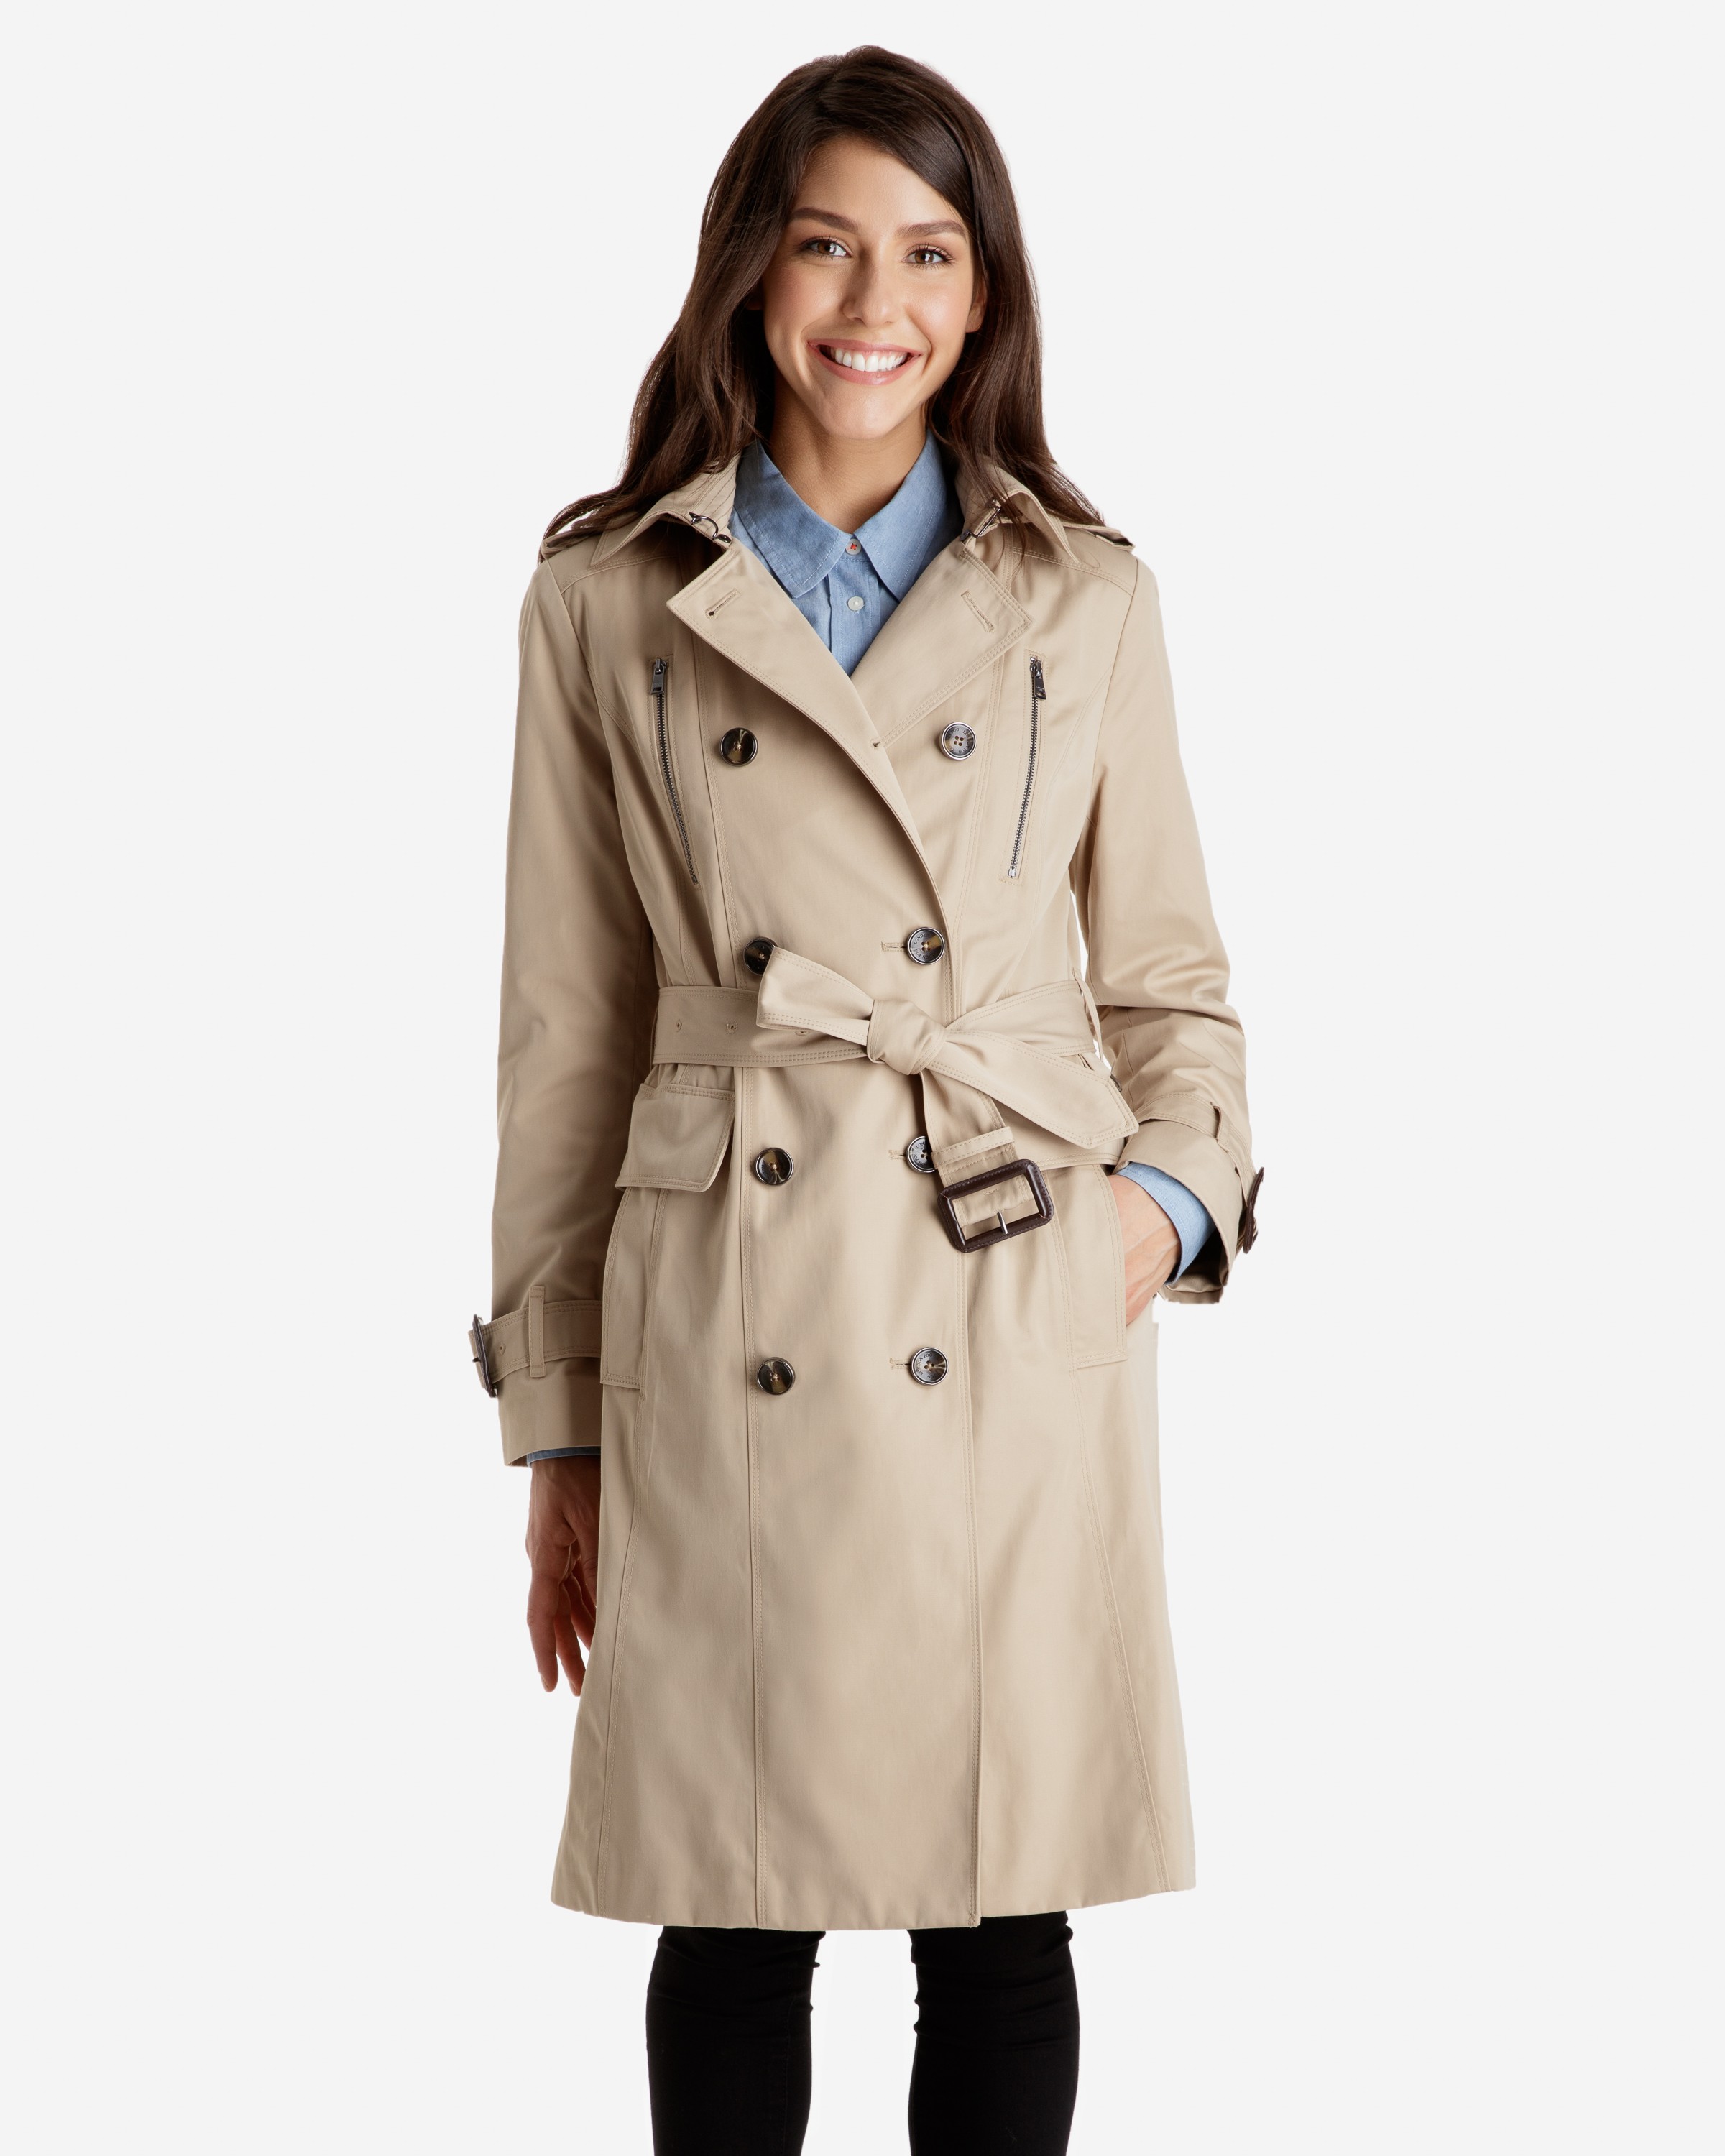 How to select Best ladies trench coat for this winter